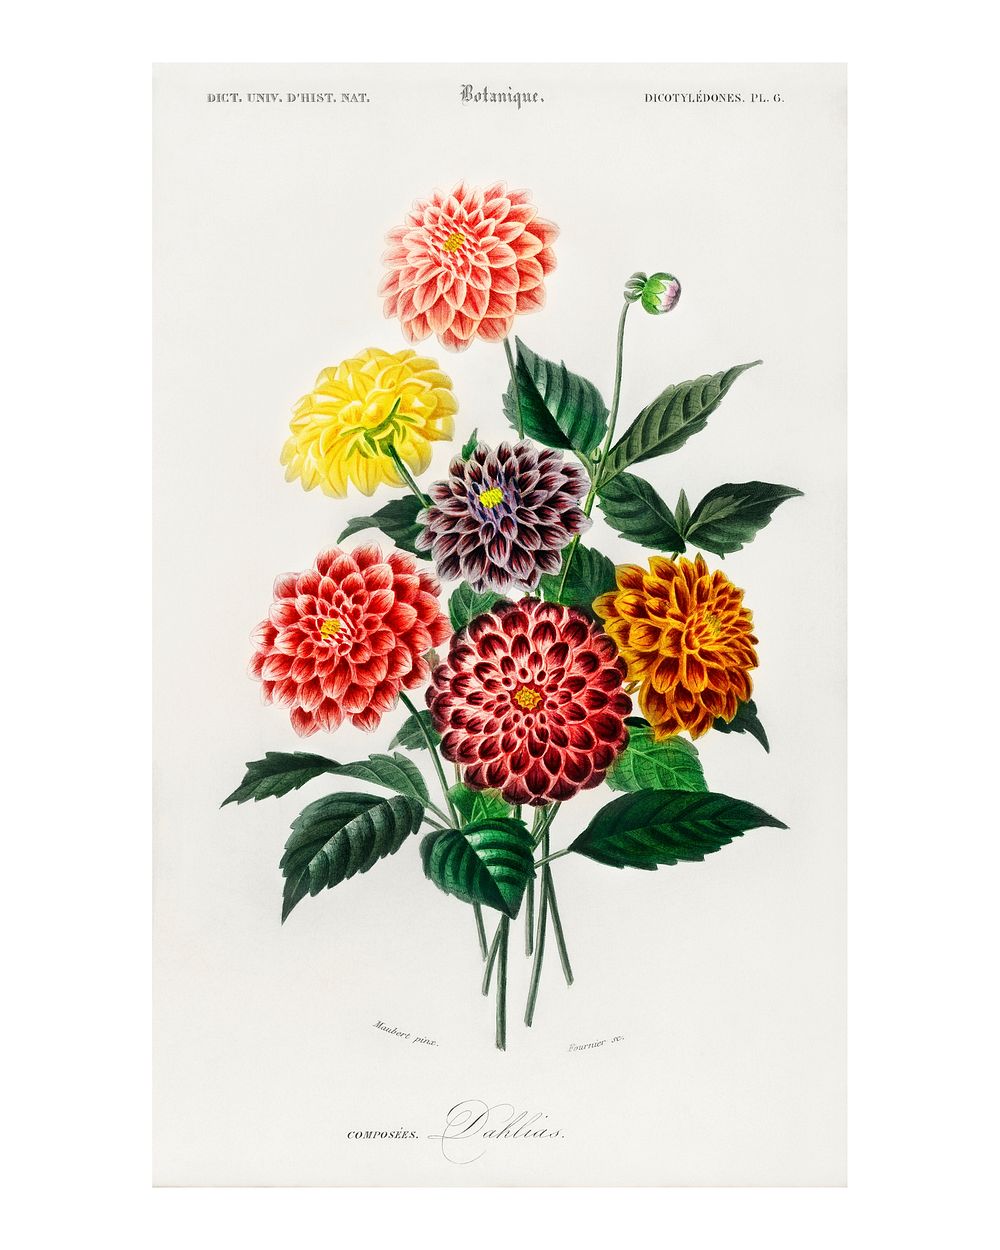 Dahlia bouquet vintage illustration wall art print and poster design remix from the original artwork.